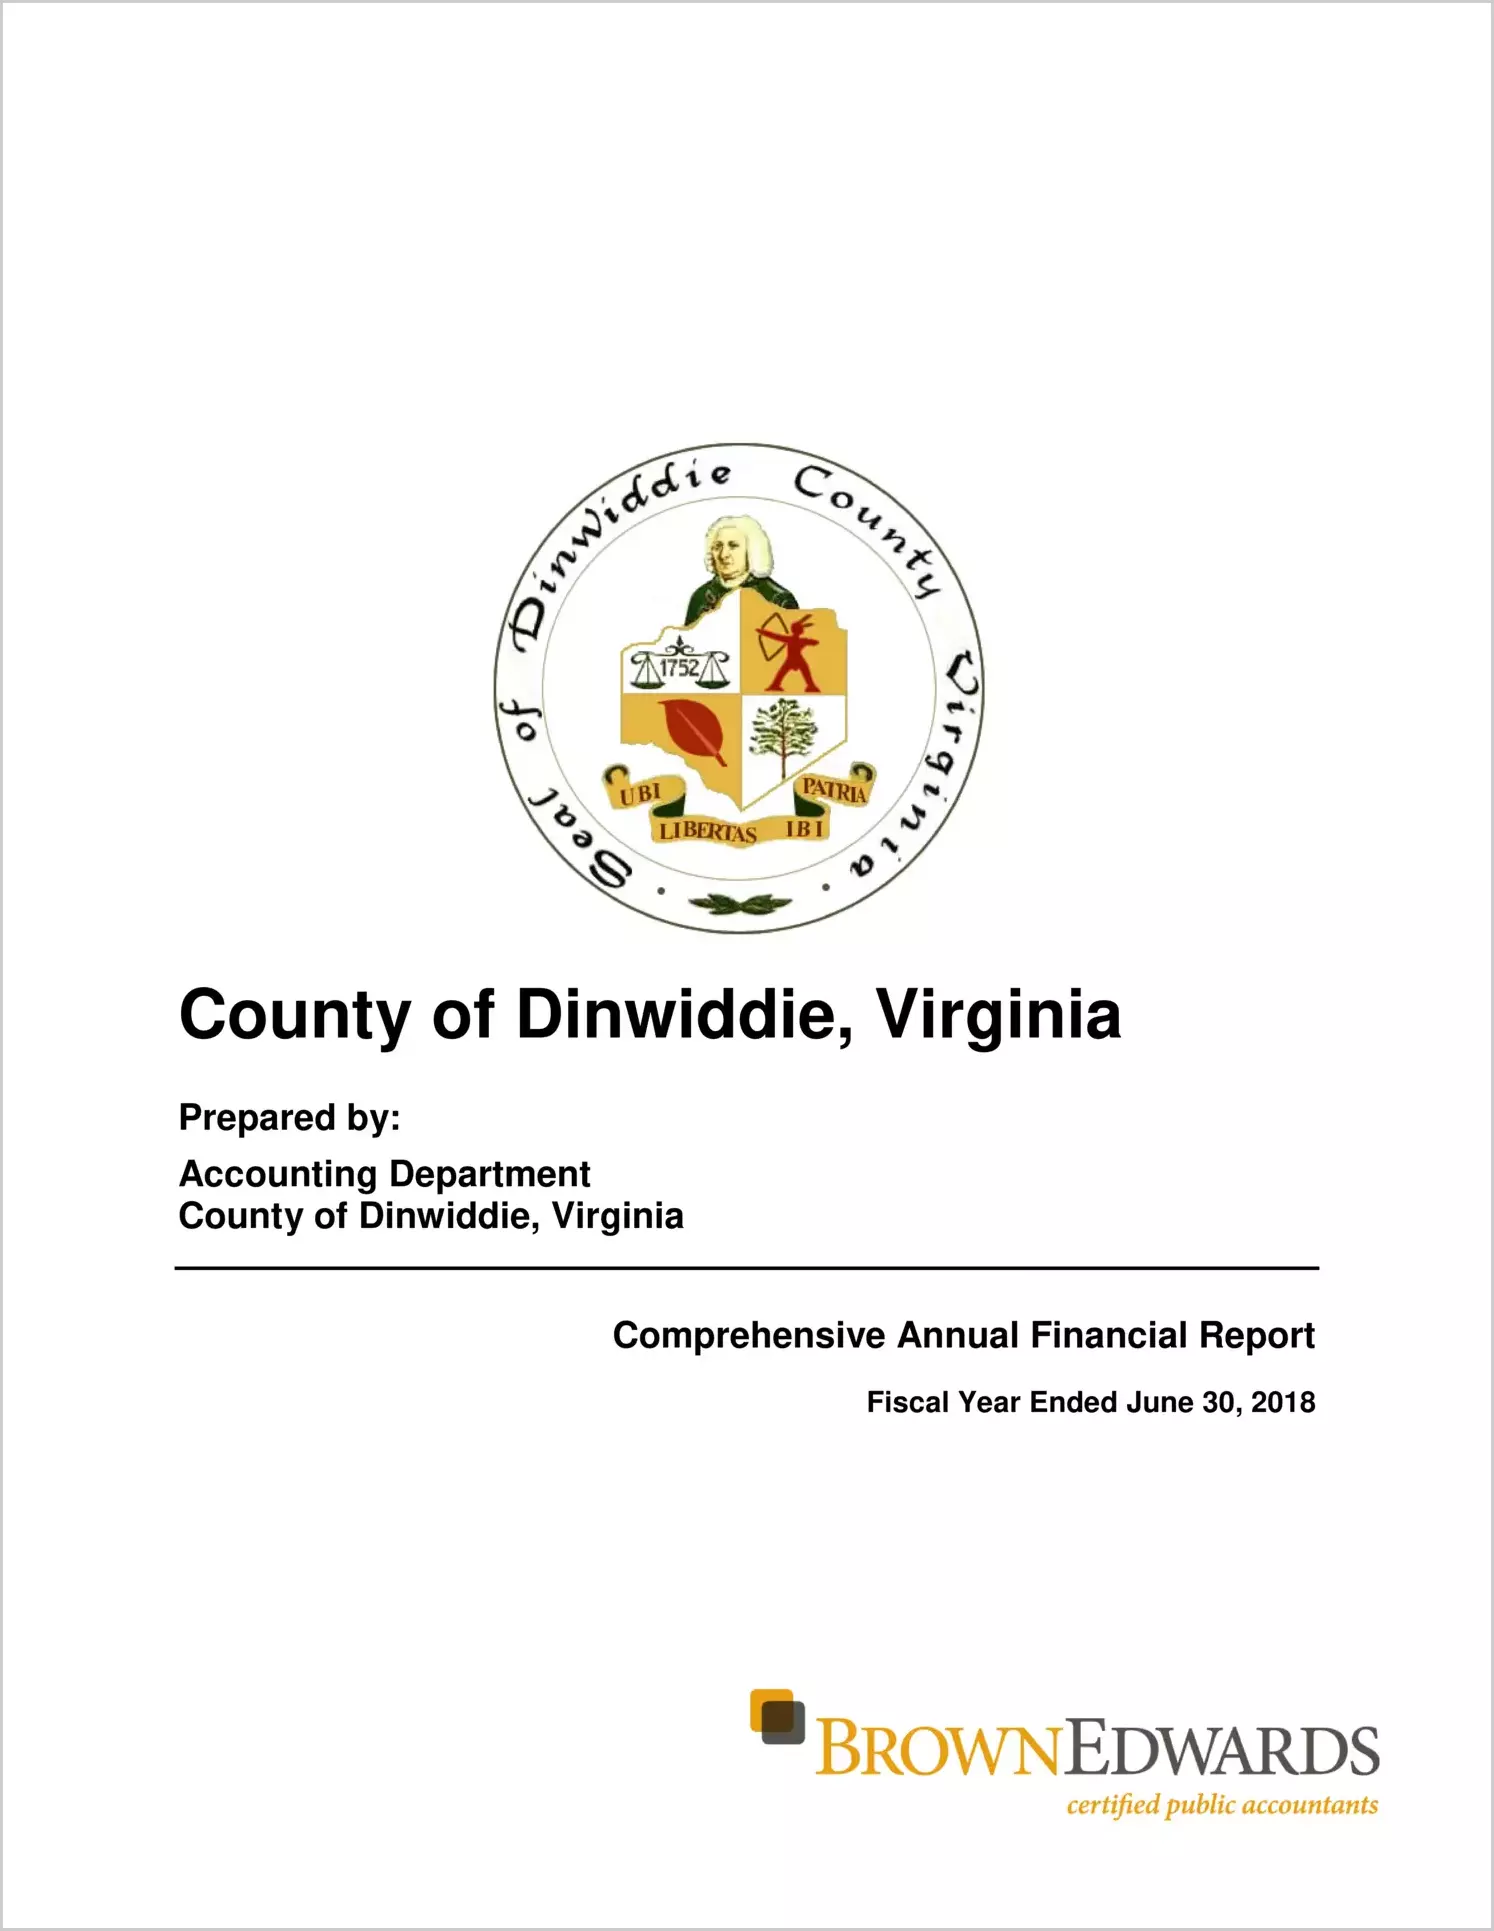 2018 Annual Financial Report for County of Dinwiddie